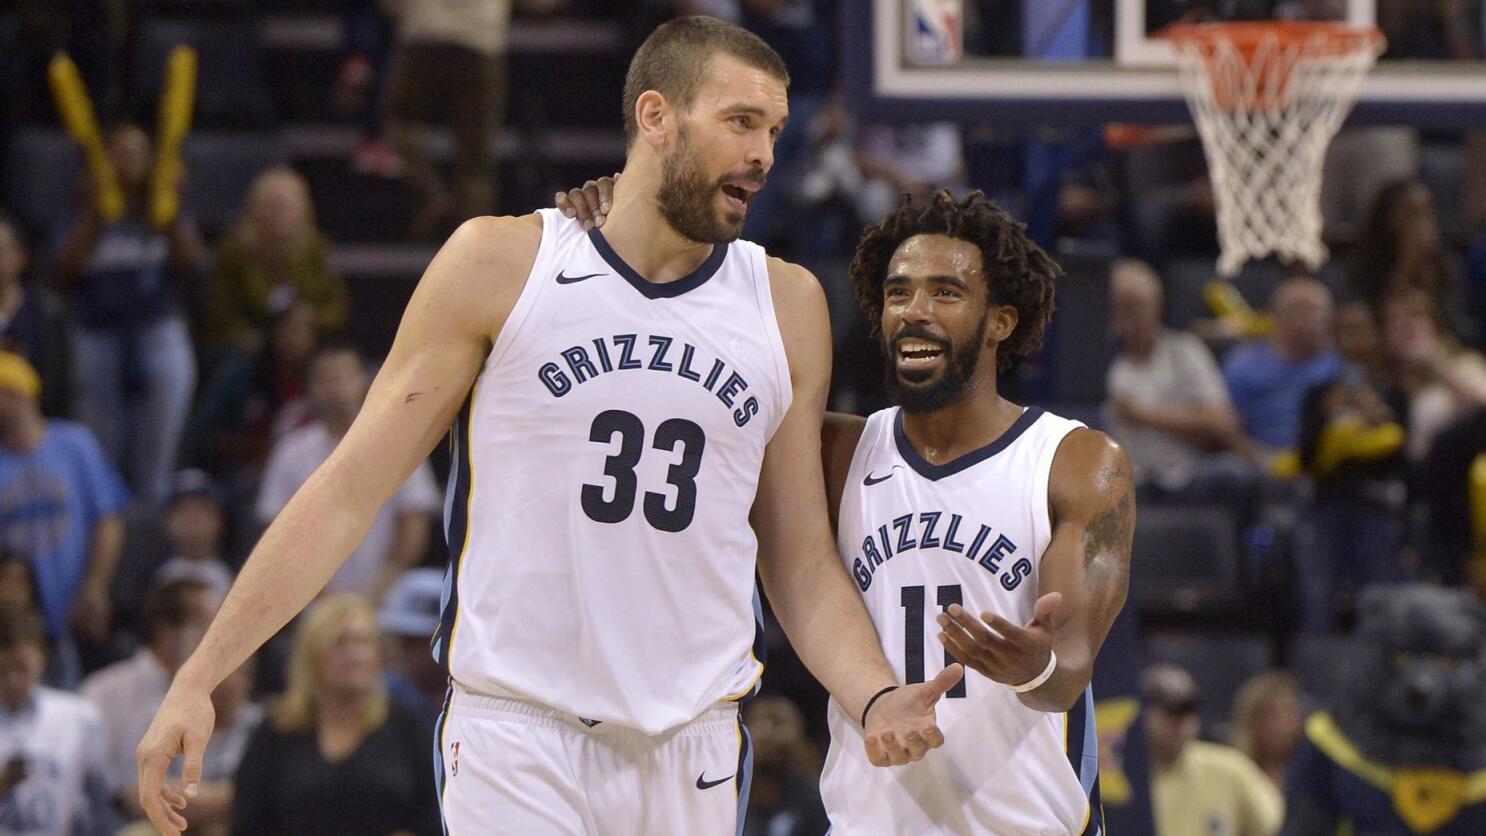 The Story of Jason Peters and Marc Gasol (Part III and Part IV)